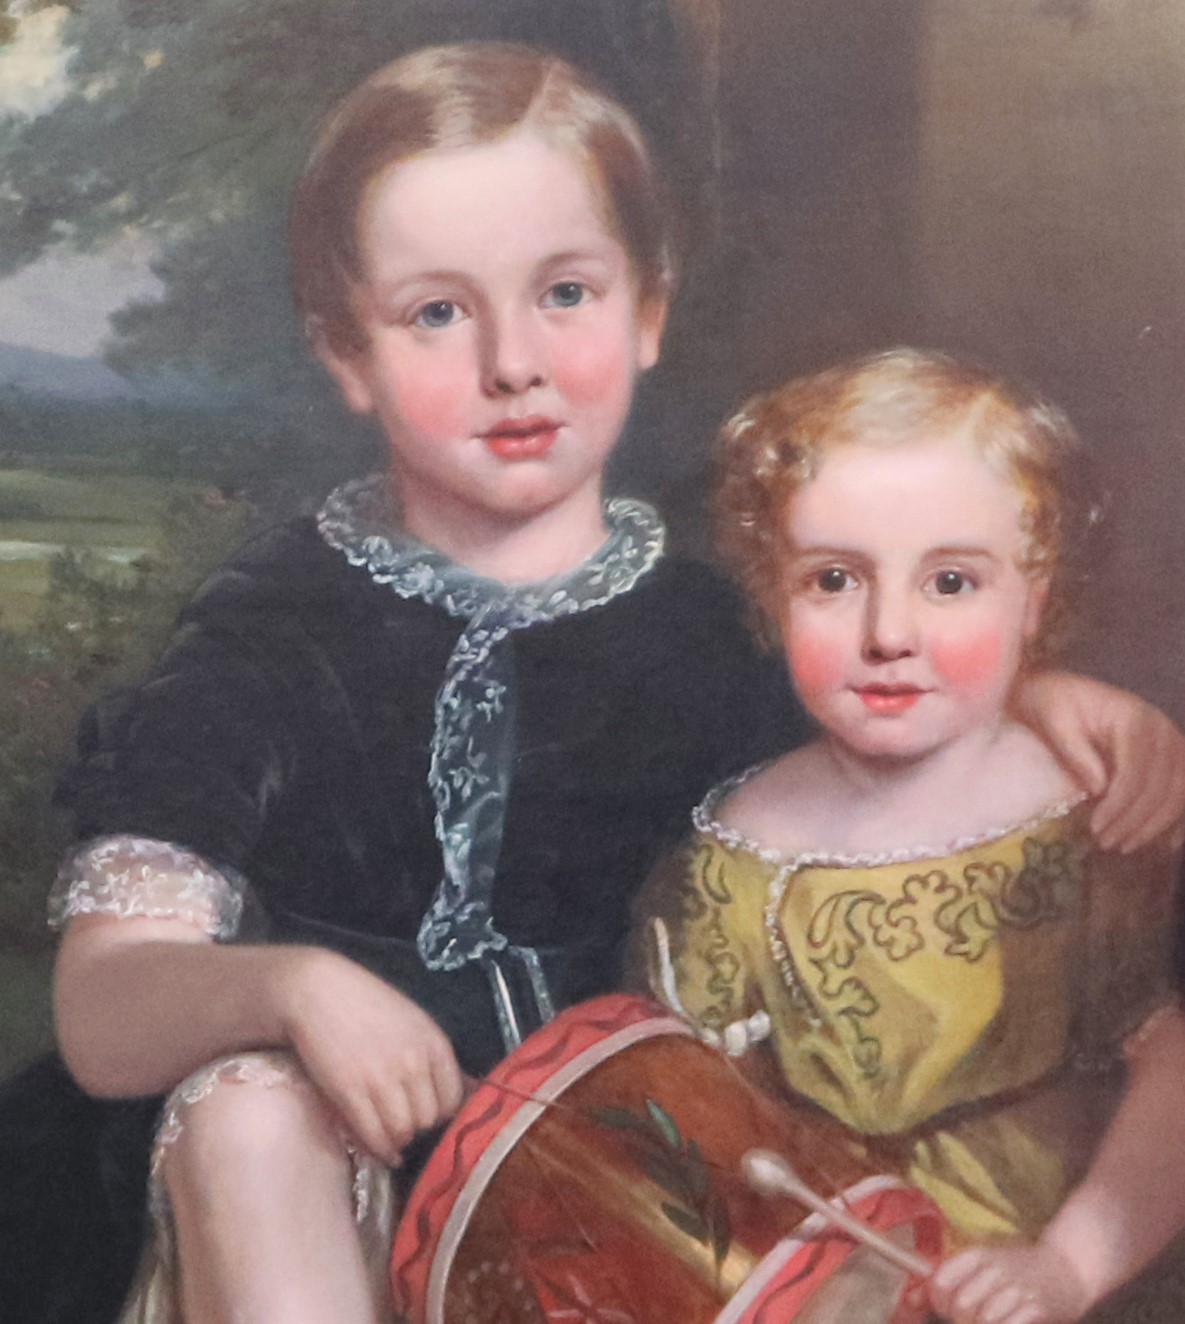 Firmstone children depicted in the family portrait shown attributed to Harry Spurrier Parkman